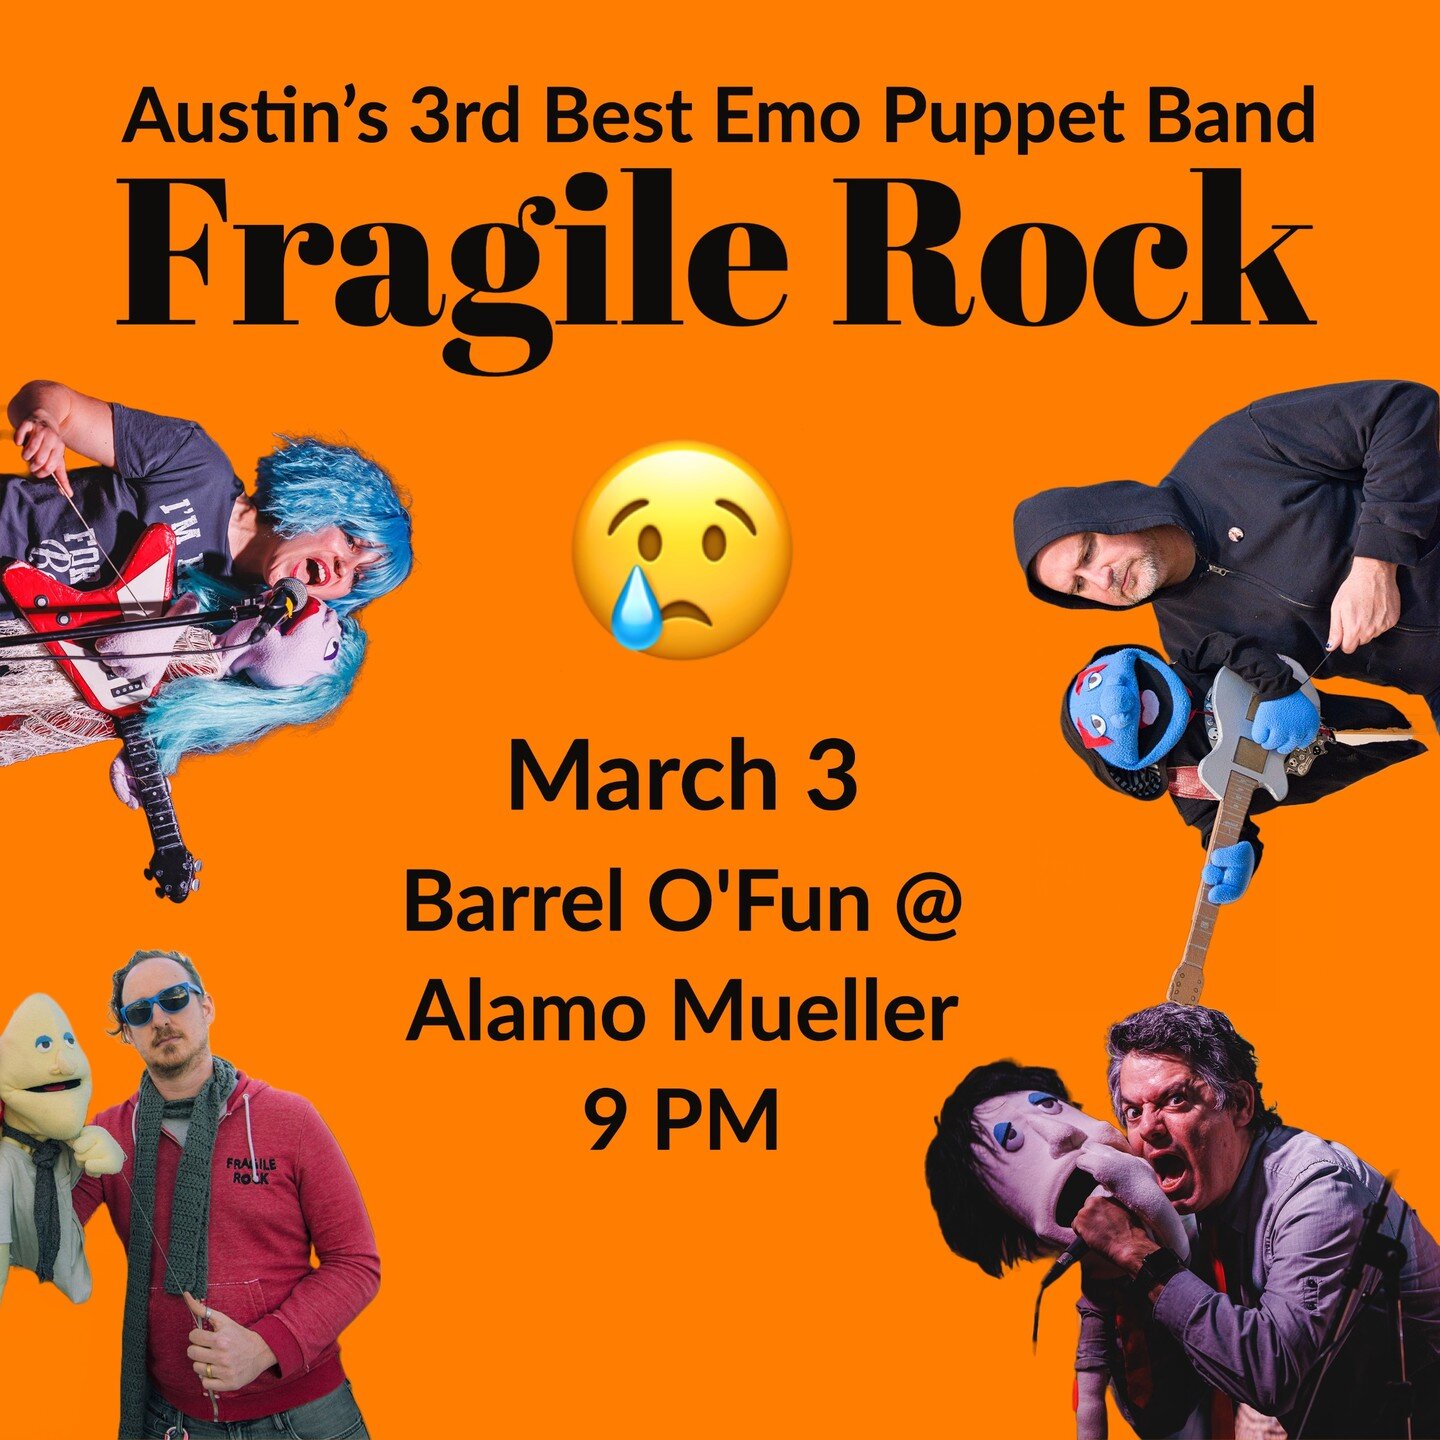 New songs, same sadness. 😢
Our last show before SXSW! 
FREE Friday March 3rd @barrelofun